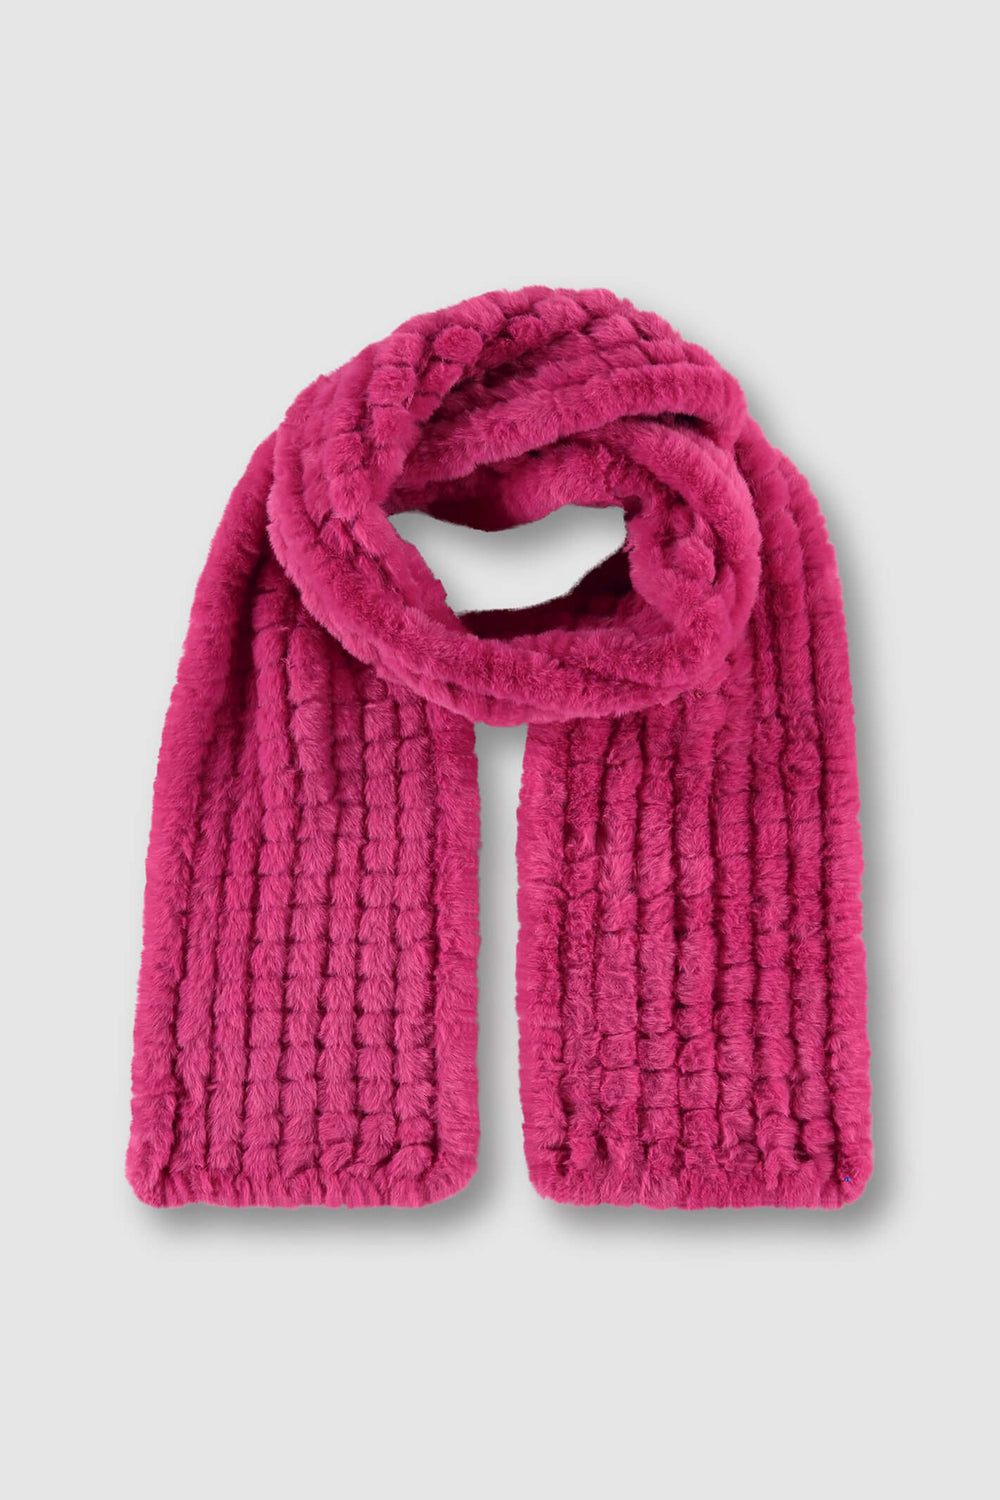 Rino & Pelle Afke 7002310 Barberry Pink Faux Fur Scarf - Dotique